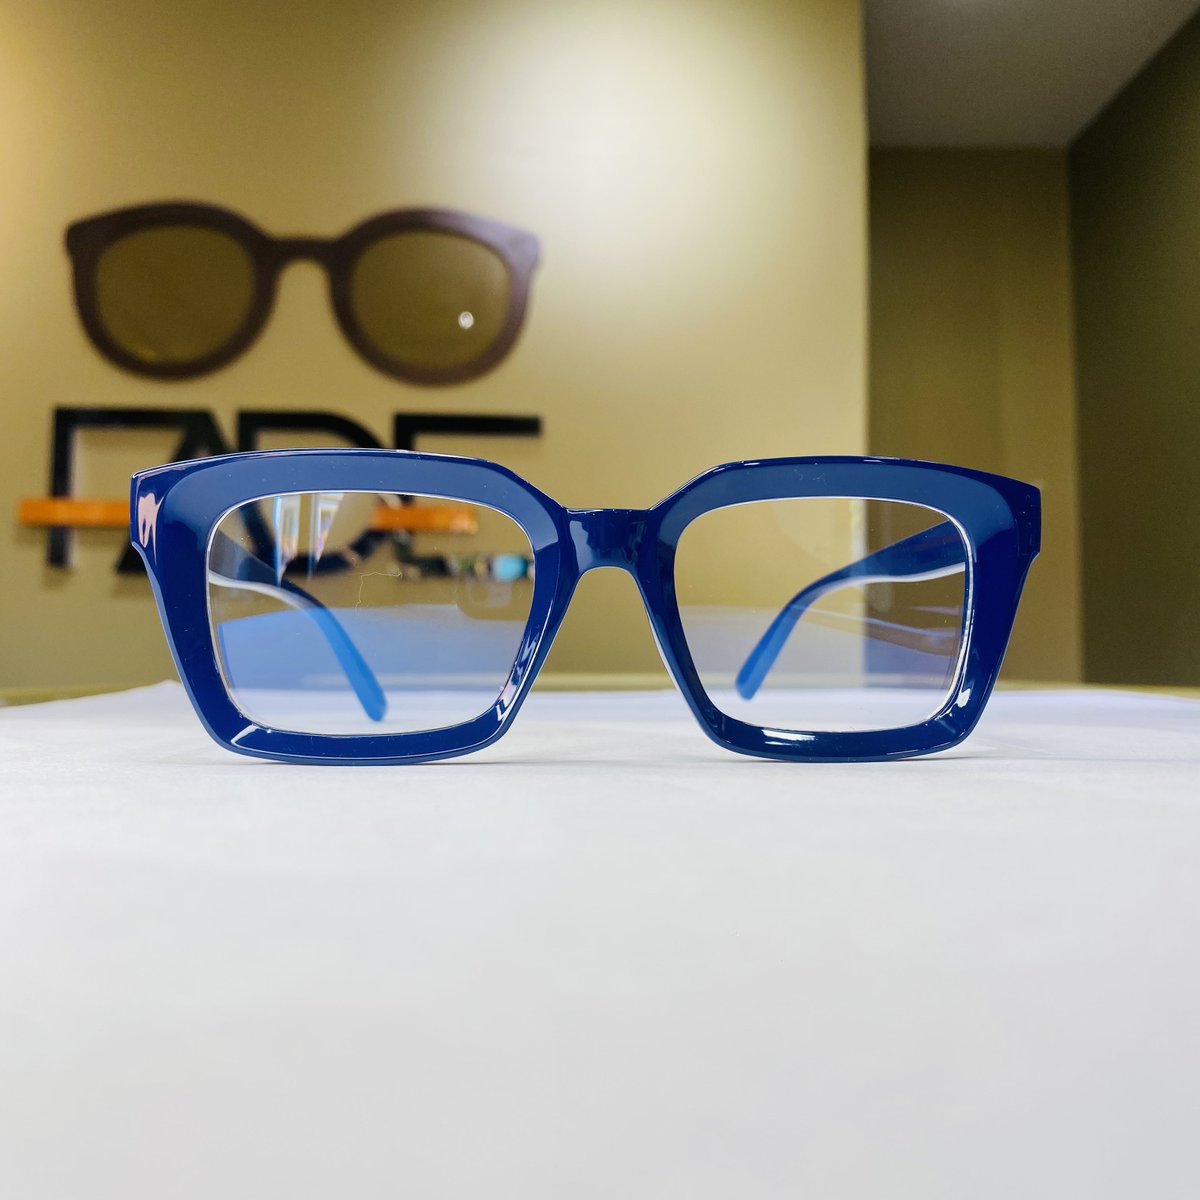 Make a fashion statement with our blue-tiful eyewear! 😉 Whether you prefer round, rectangular, or oversized frames, we have the perfect pair to add a pop of color to any outfit. Shop today! 🛍️ 💰: UGX120,000 - UGX180,000 ☎️: 0705 355 222 📍: ORJ Mall Kaduyu Rd, Kiwatule